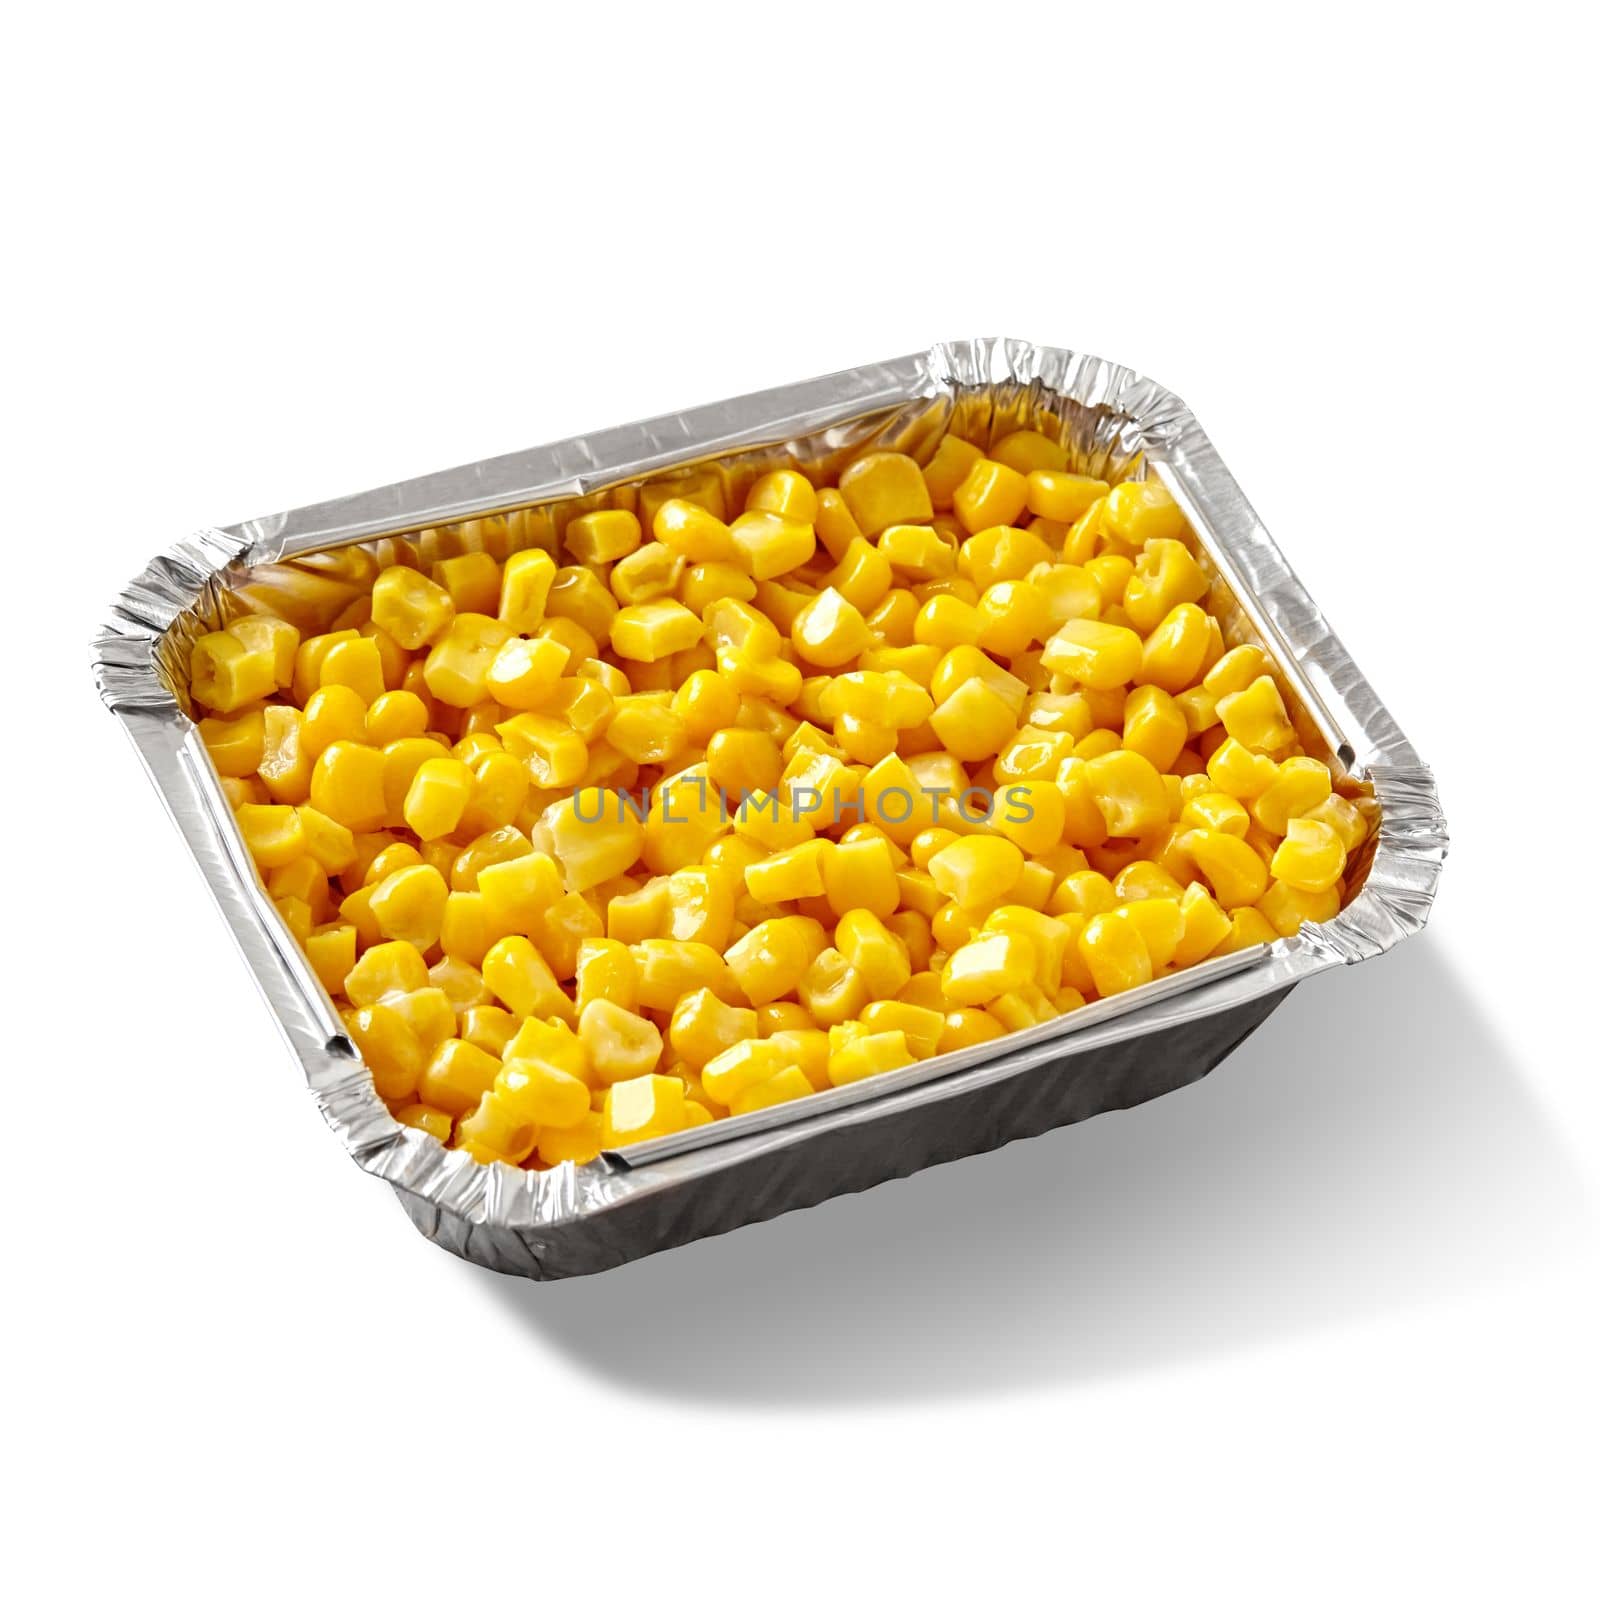 Closeup of appetizing sweet yellow boiled corn kernels in aluminium foil container isolated on white background. Delicious organic snack. Healthy takeaway food concept